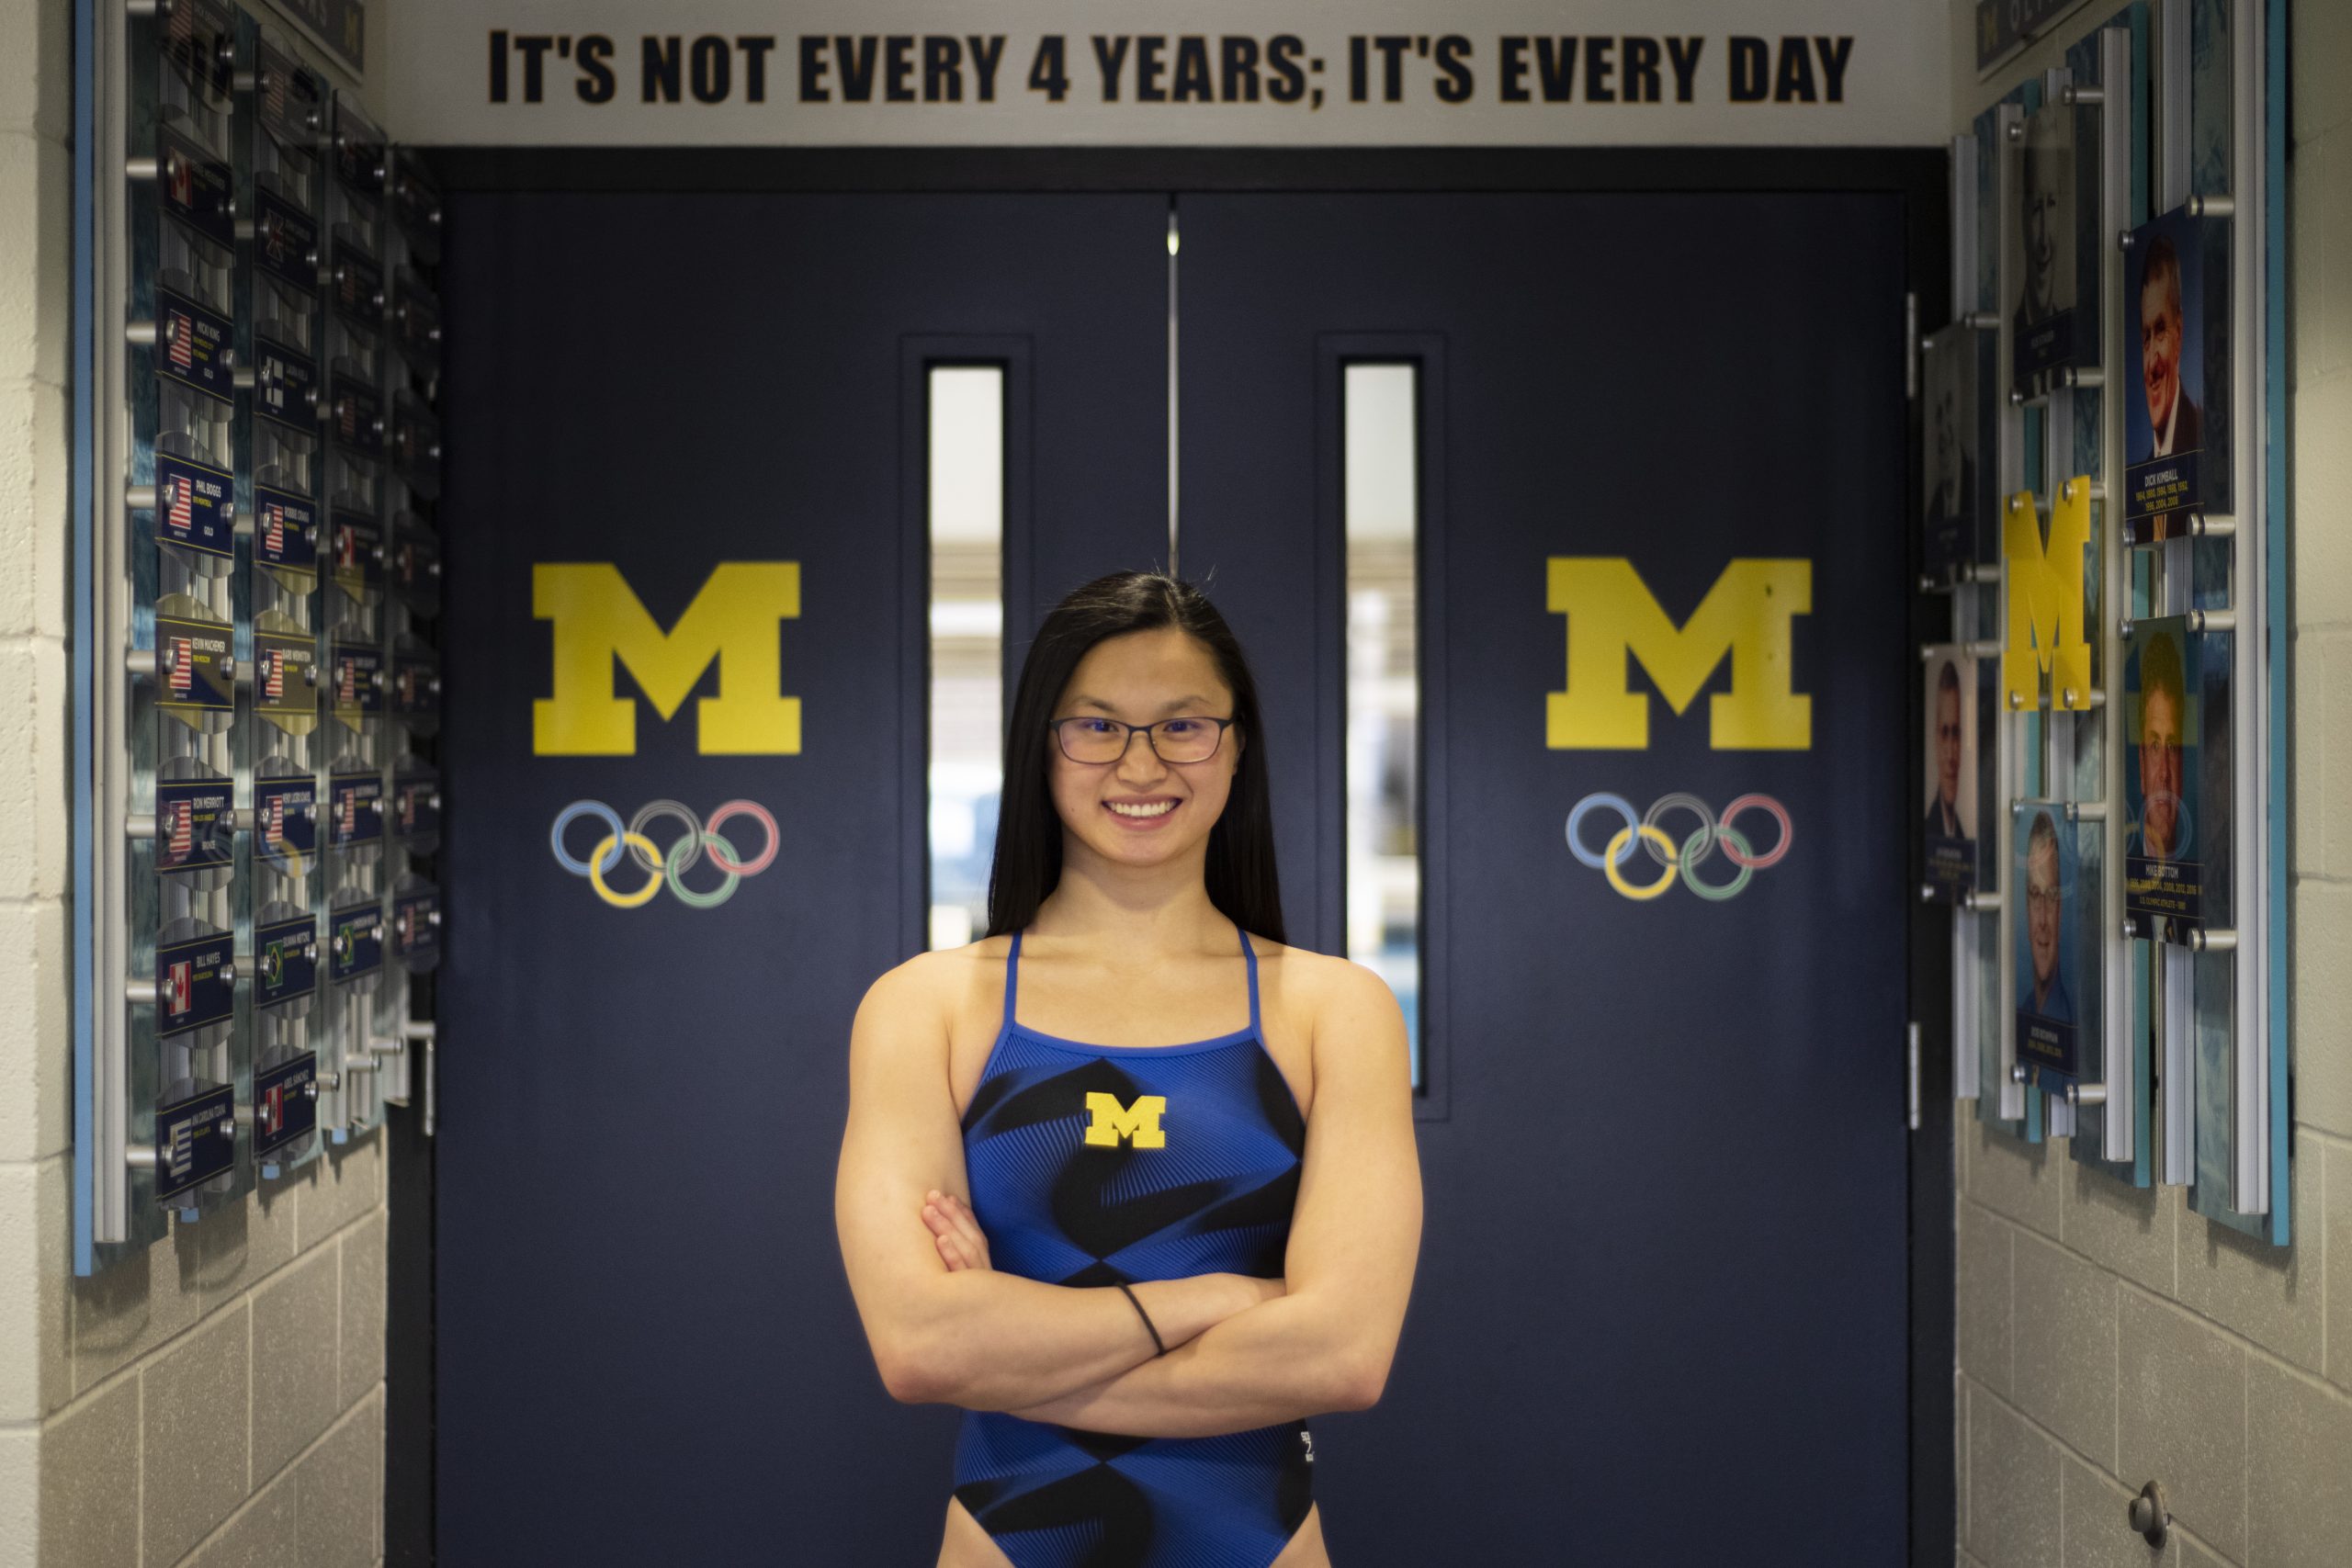 UMich swimmer Maggie MacNeil wins Olympic gold medal